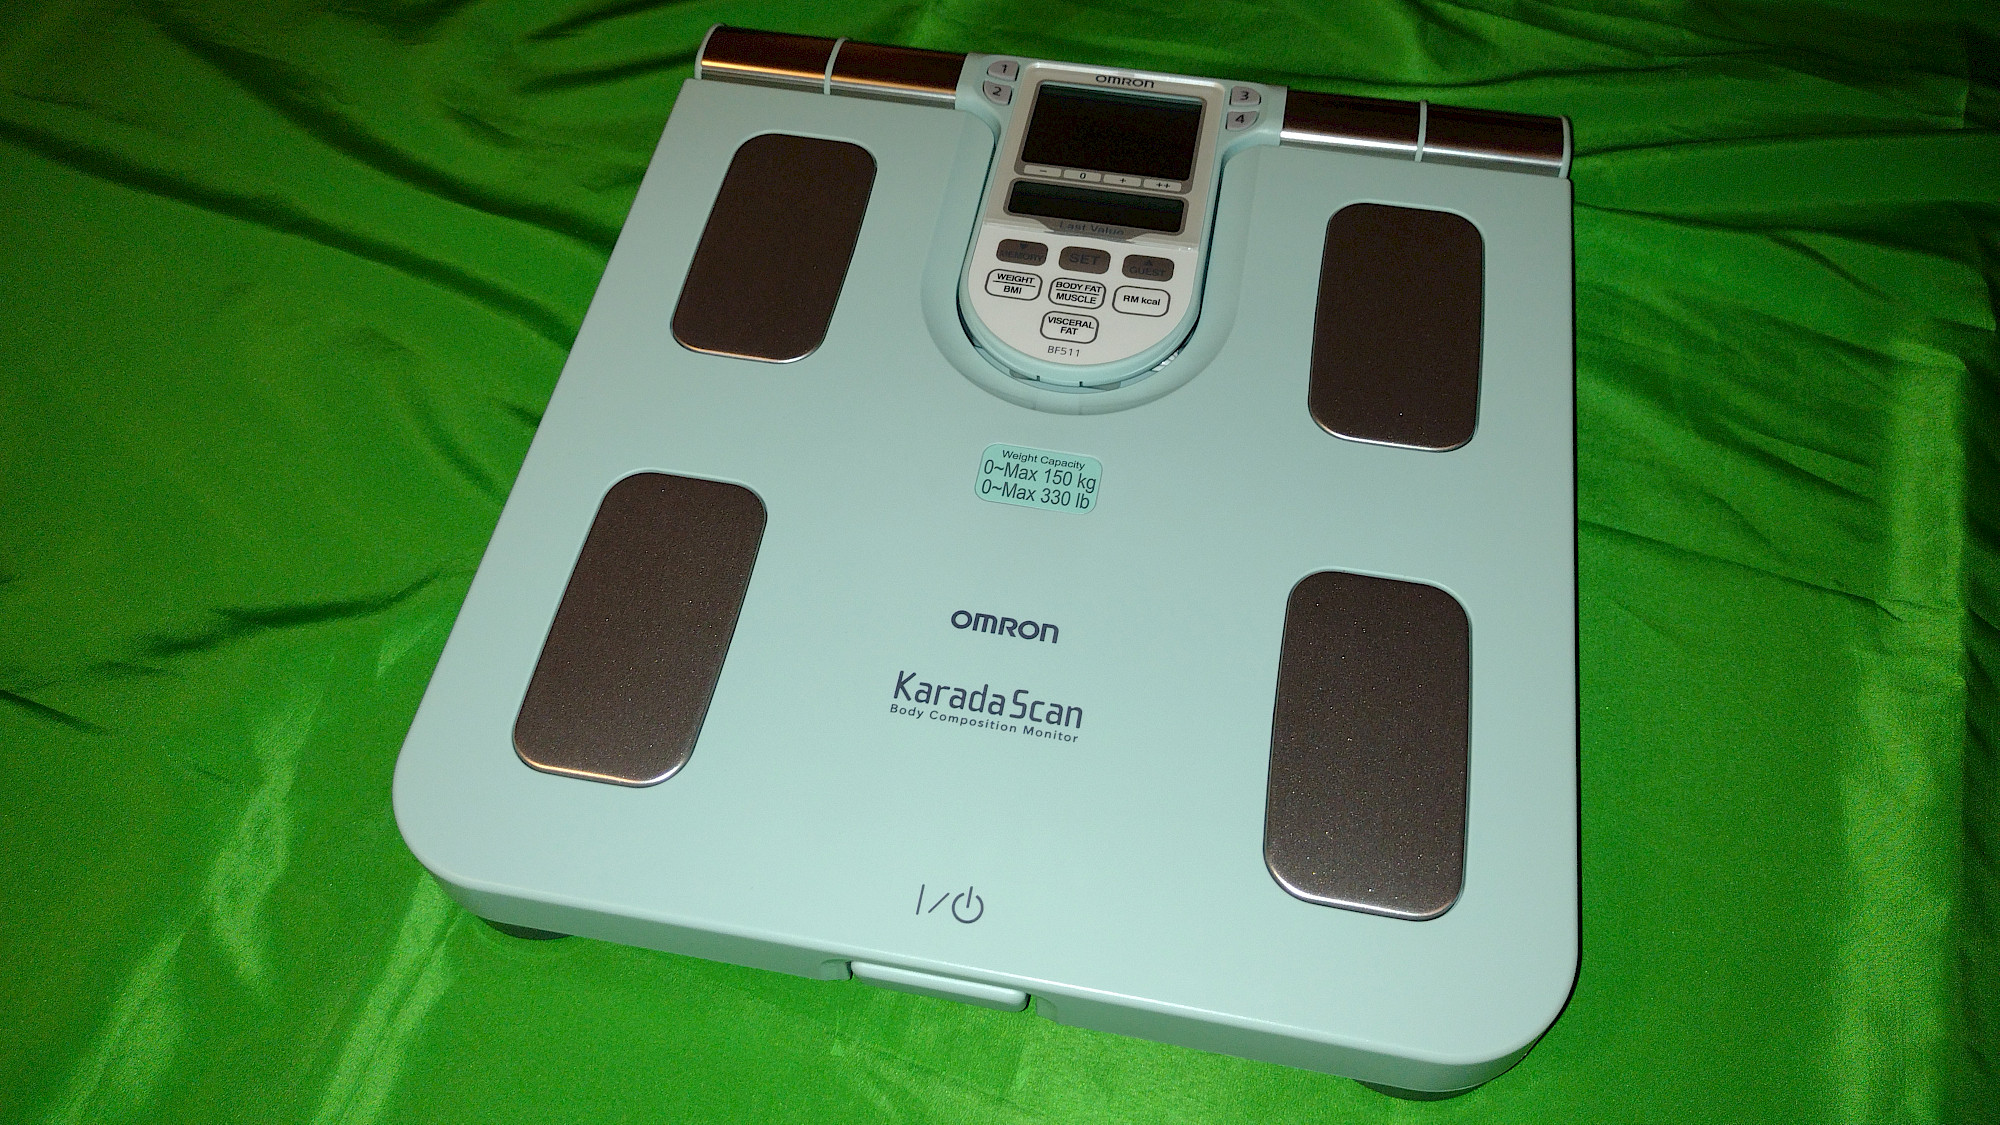 Bio-impedancemetry body composition analyzer - BF511 Blue - Omron  Healthcare Europe - for fat mass measurement / with digital display /  platform